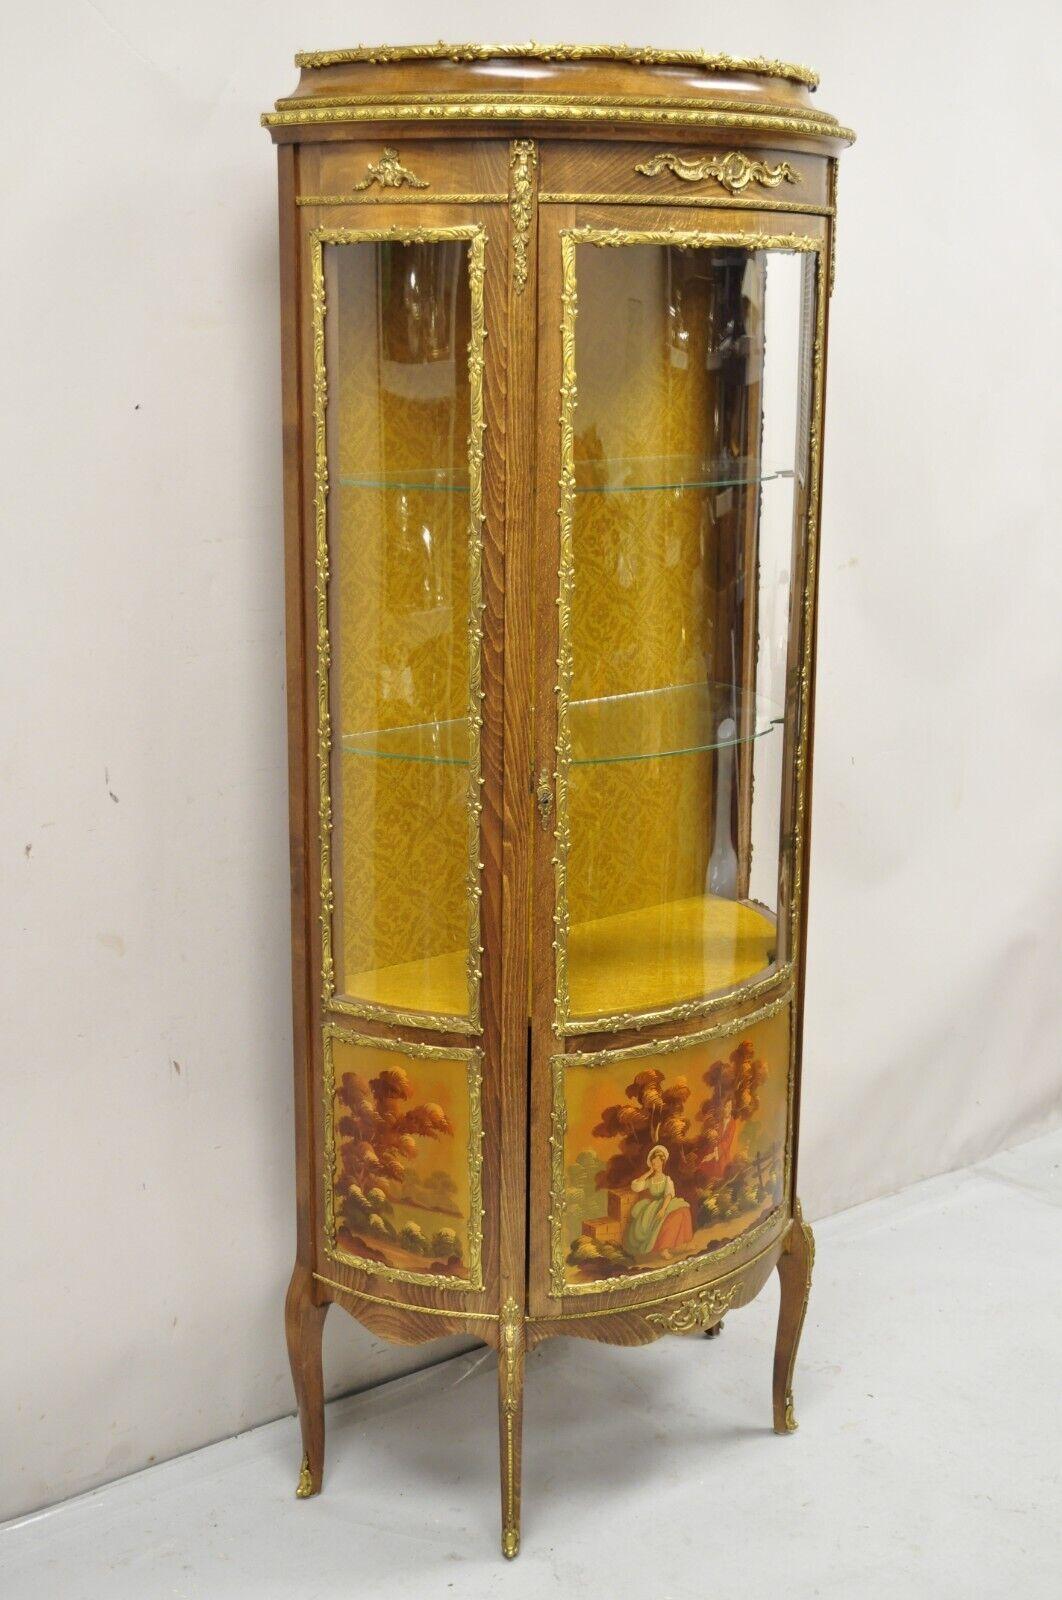 Vintage French Louis XV Style Half Round Demilune Lighted Curio Display Cabinet.  Item features bowed plexiglass panels, hand painted scenes, brass ormolu, very nice vintage item, made in Spain. Circa Mid 20th Century. Measurements: 68